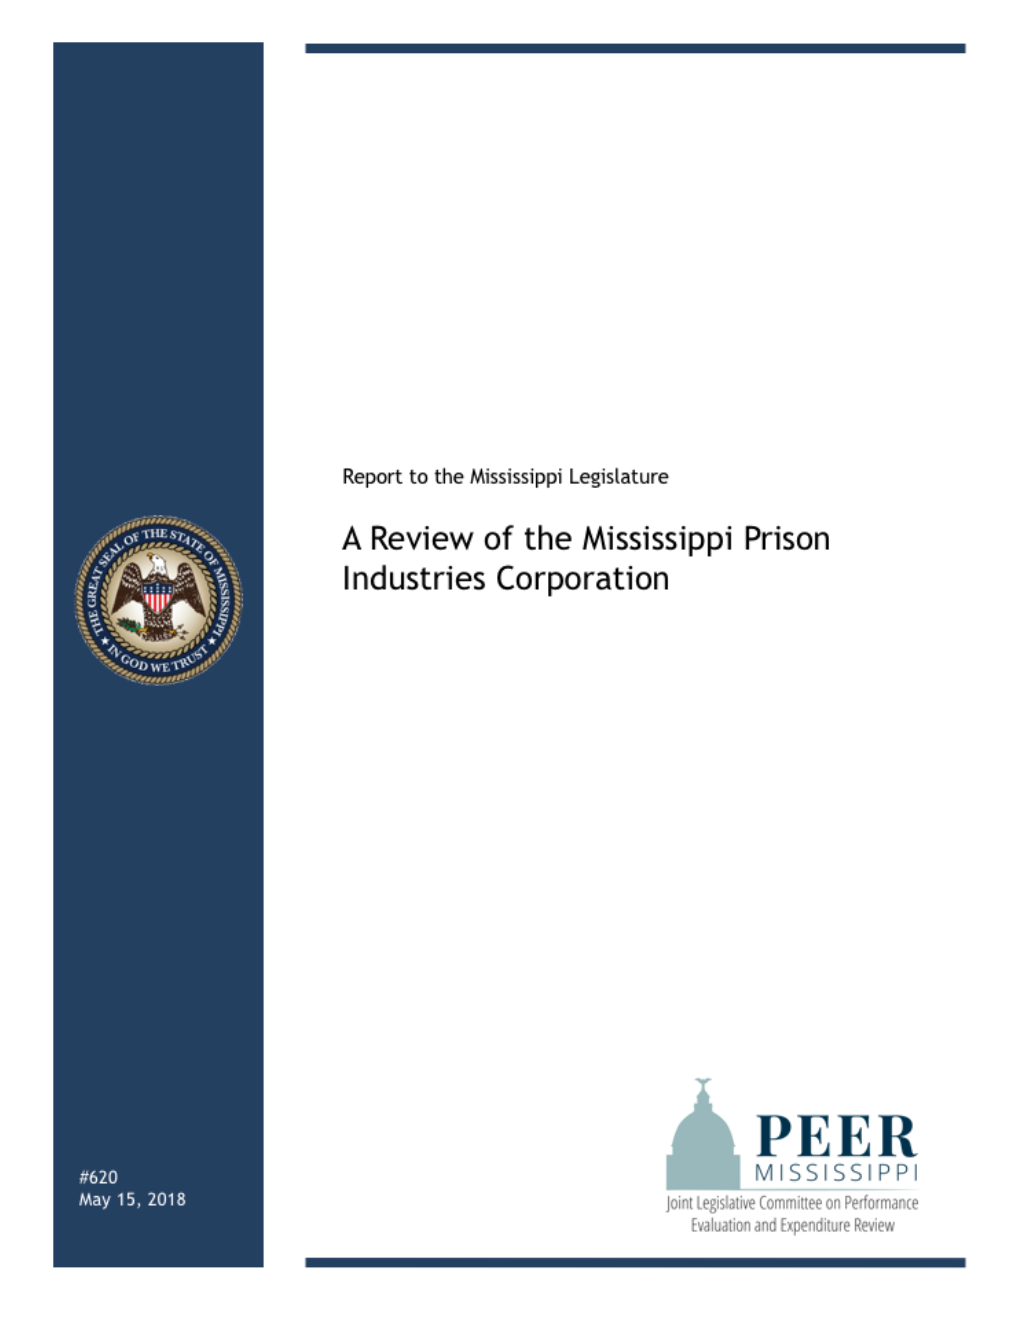 A Review of the Mississippi Prison Industries Corporation